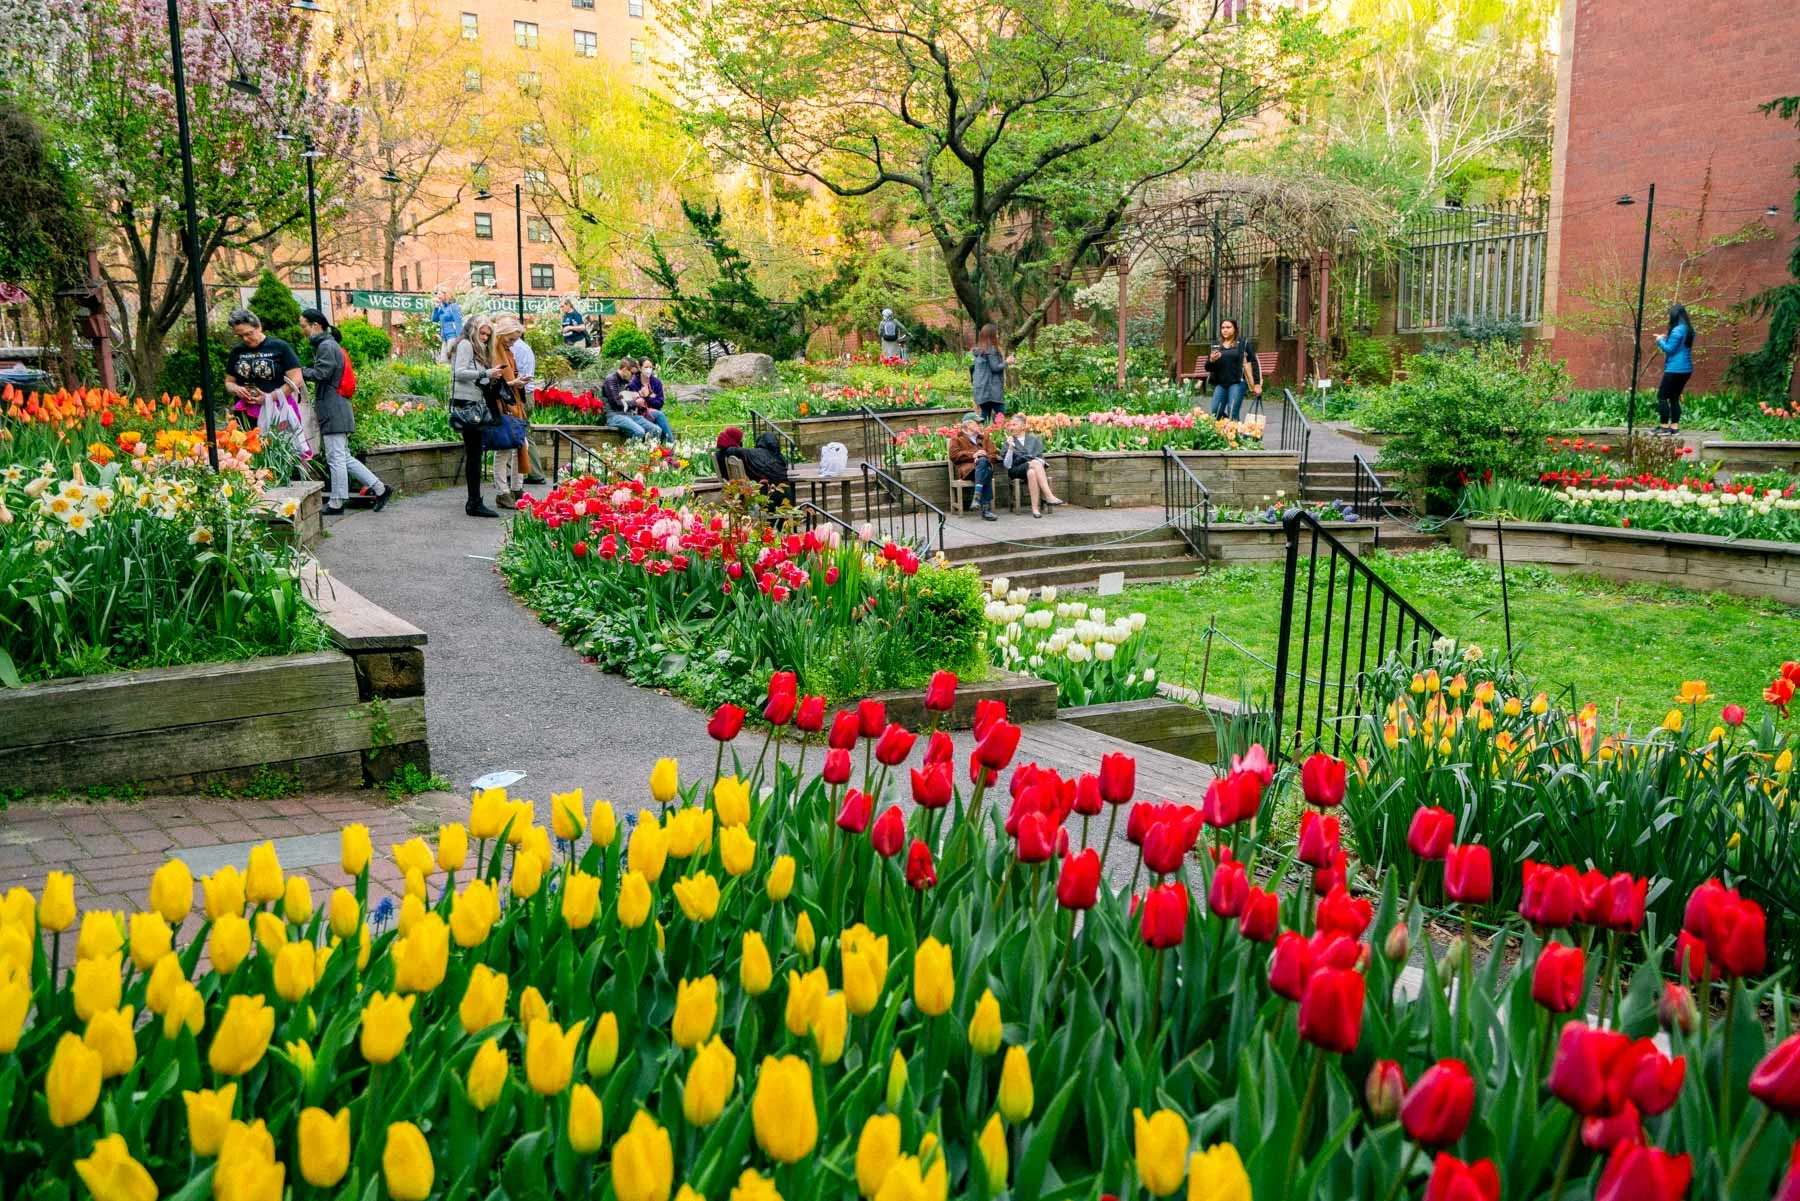 West Side Community Garden Tulips, When to visit New York City